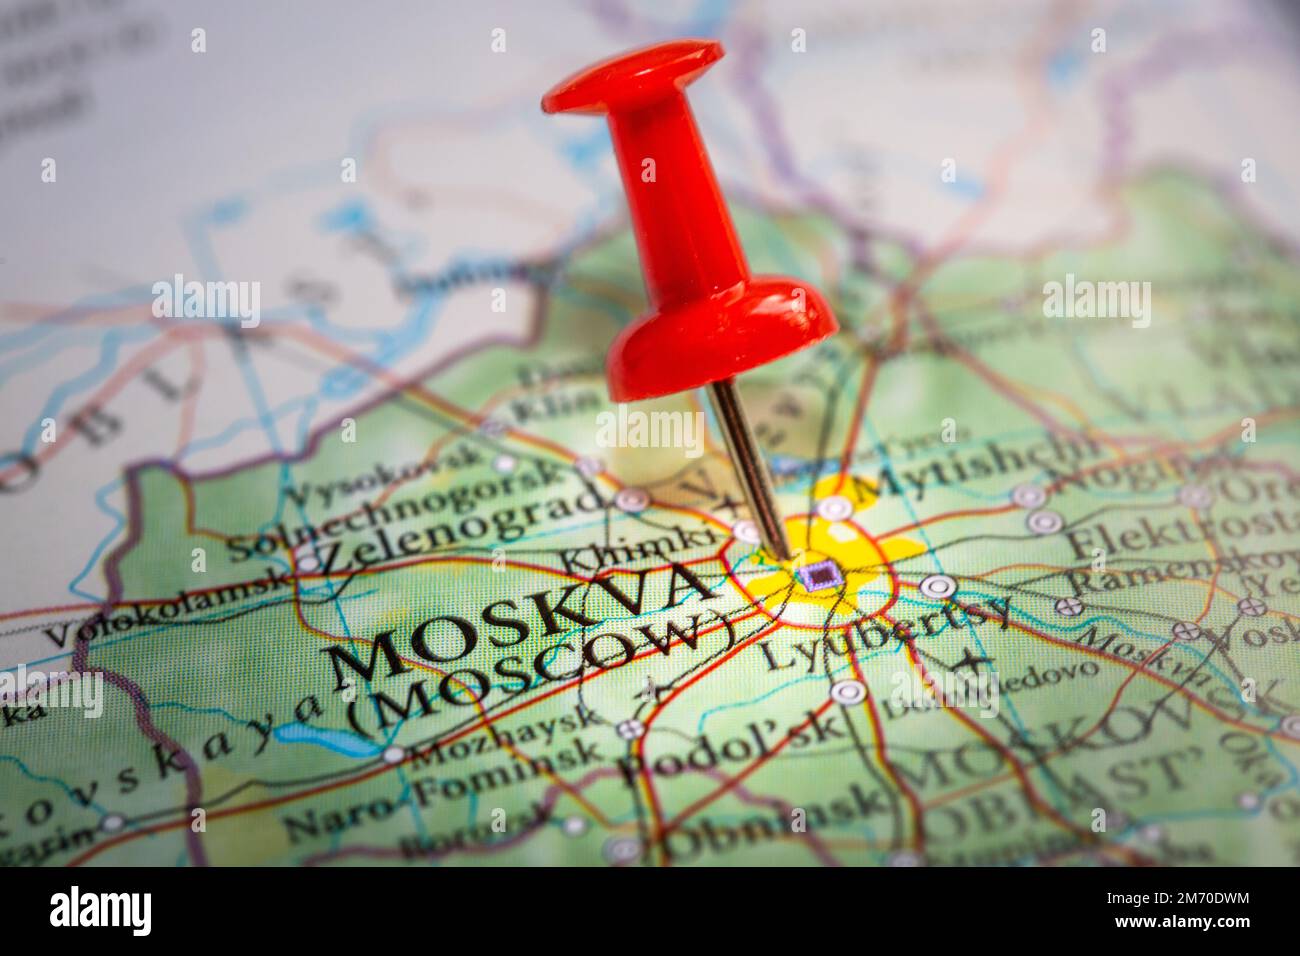 A red pin locating the Russian city of Moscow or Moskva on a detailed map in close up during the Russia invasion of Ukrain Stock Photo